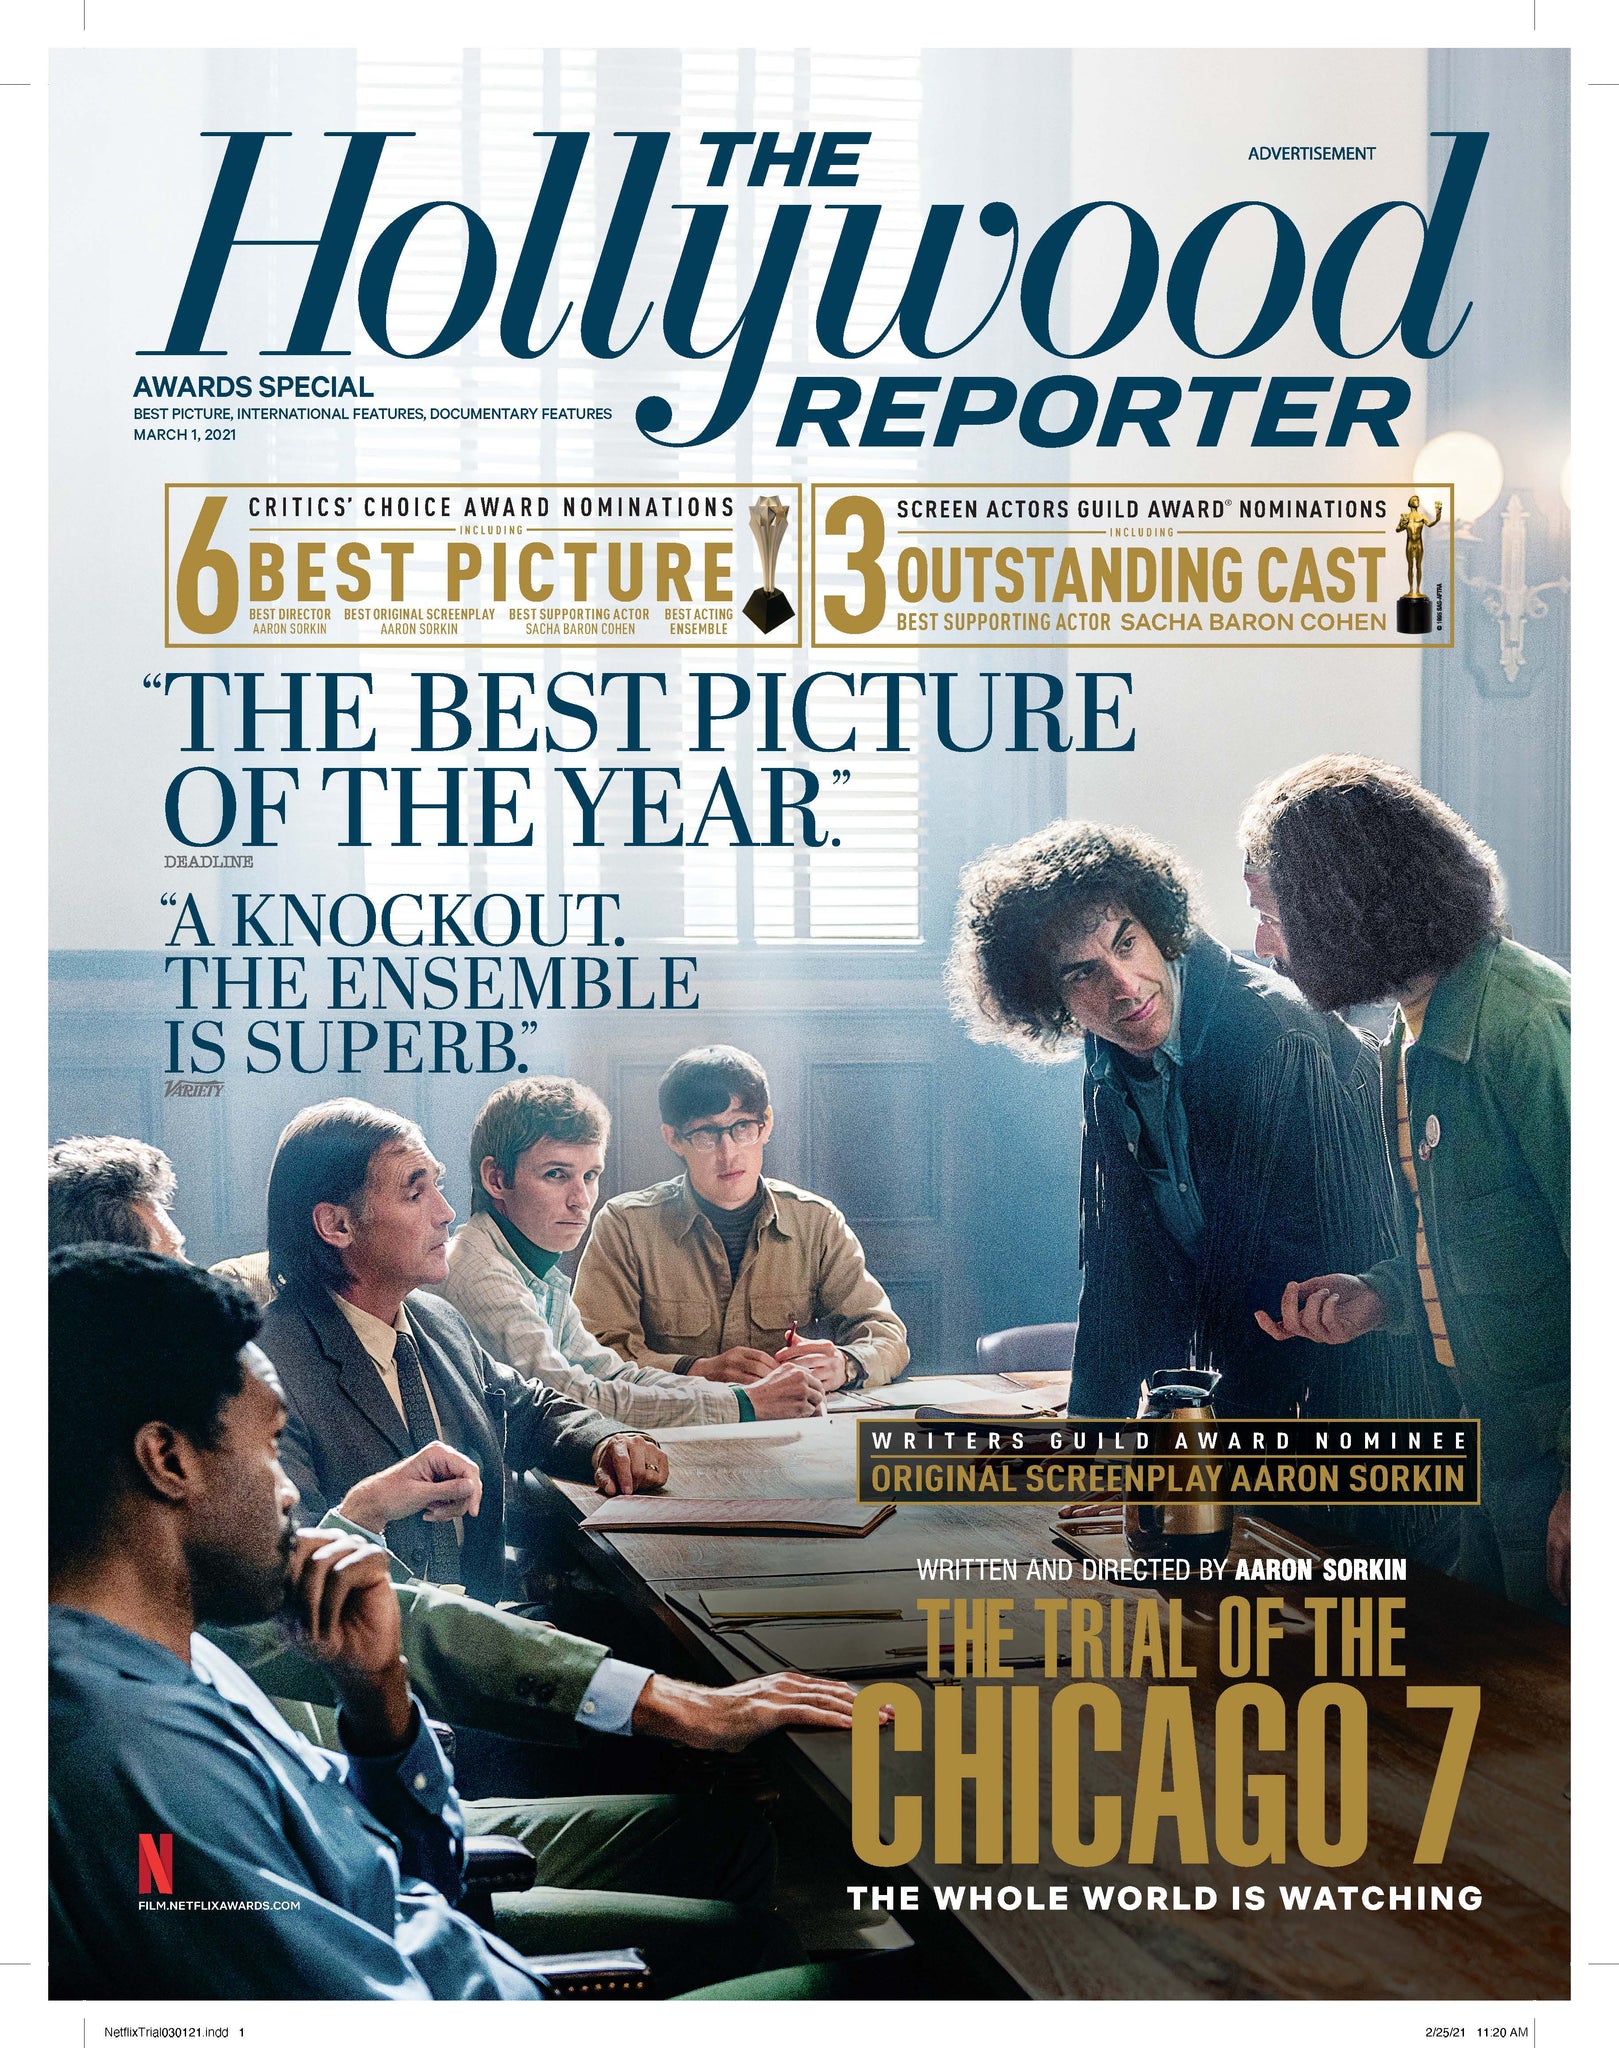 March 1, 2021 - Issue 8b - AWARDS SPECIAL - Best Picture, International Features, Documentary Features